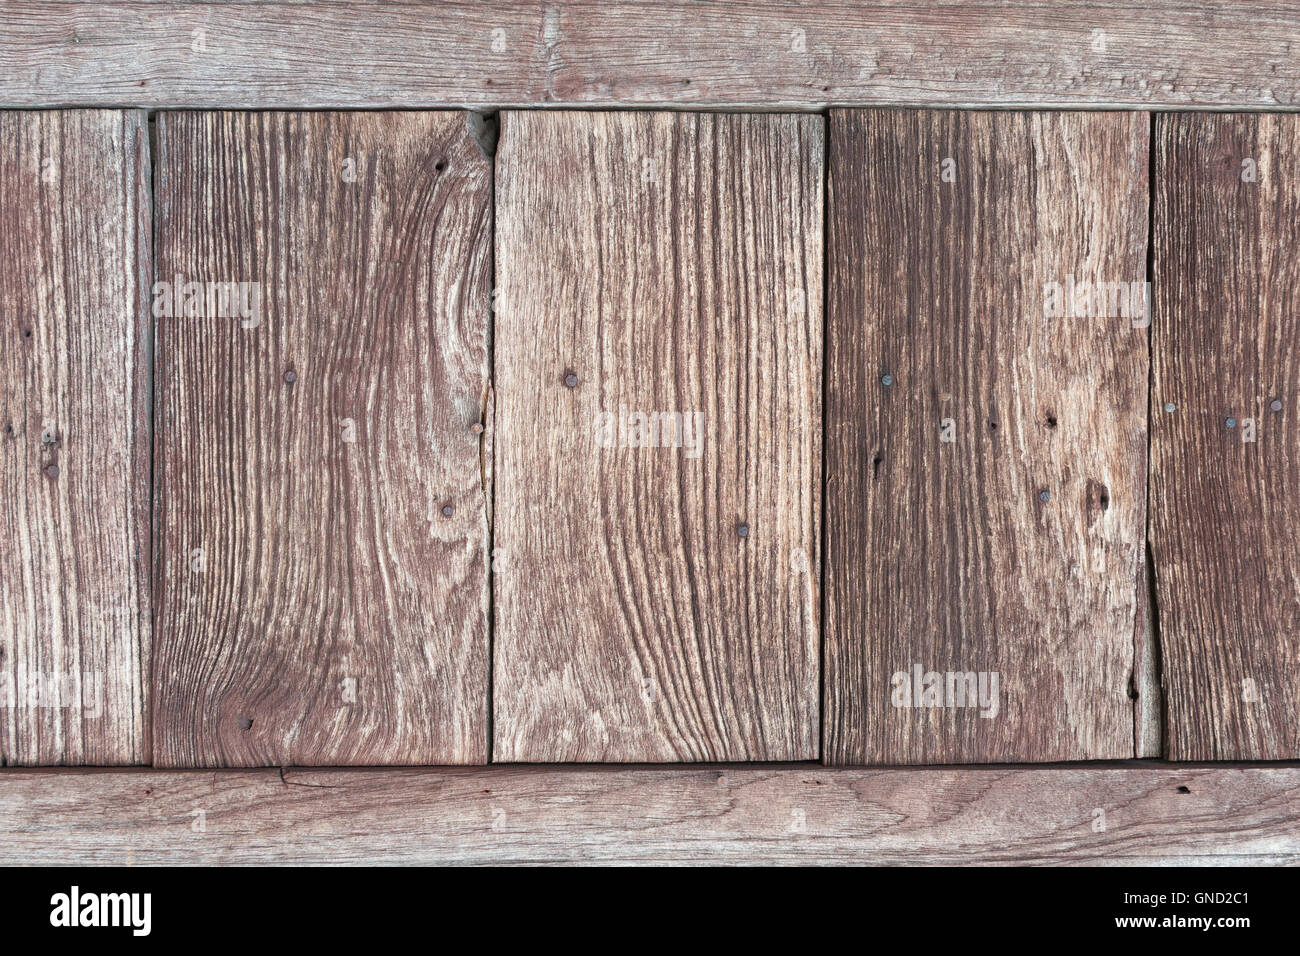 Wooden plank useful as background. Stock Photo